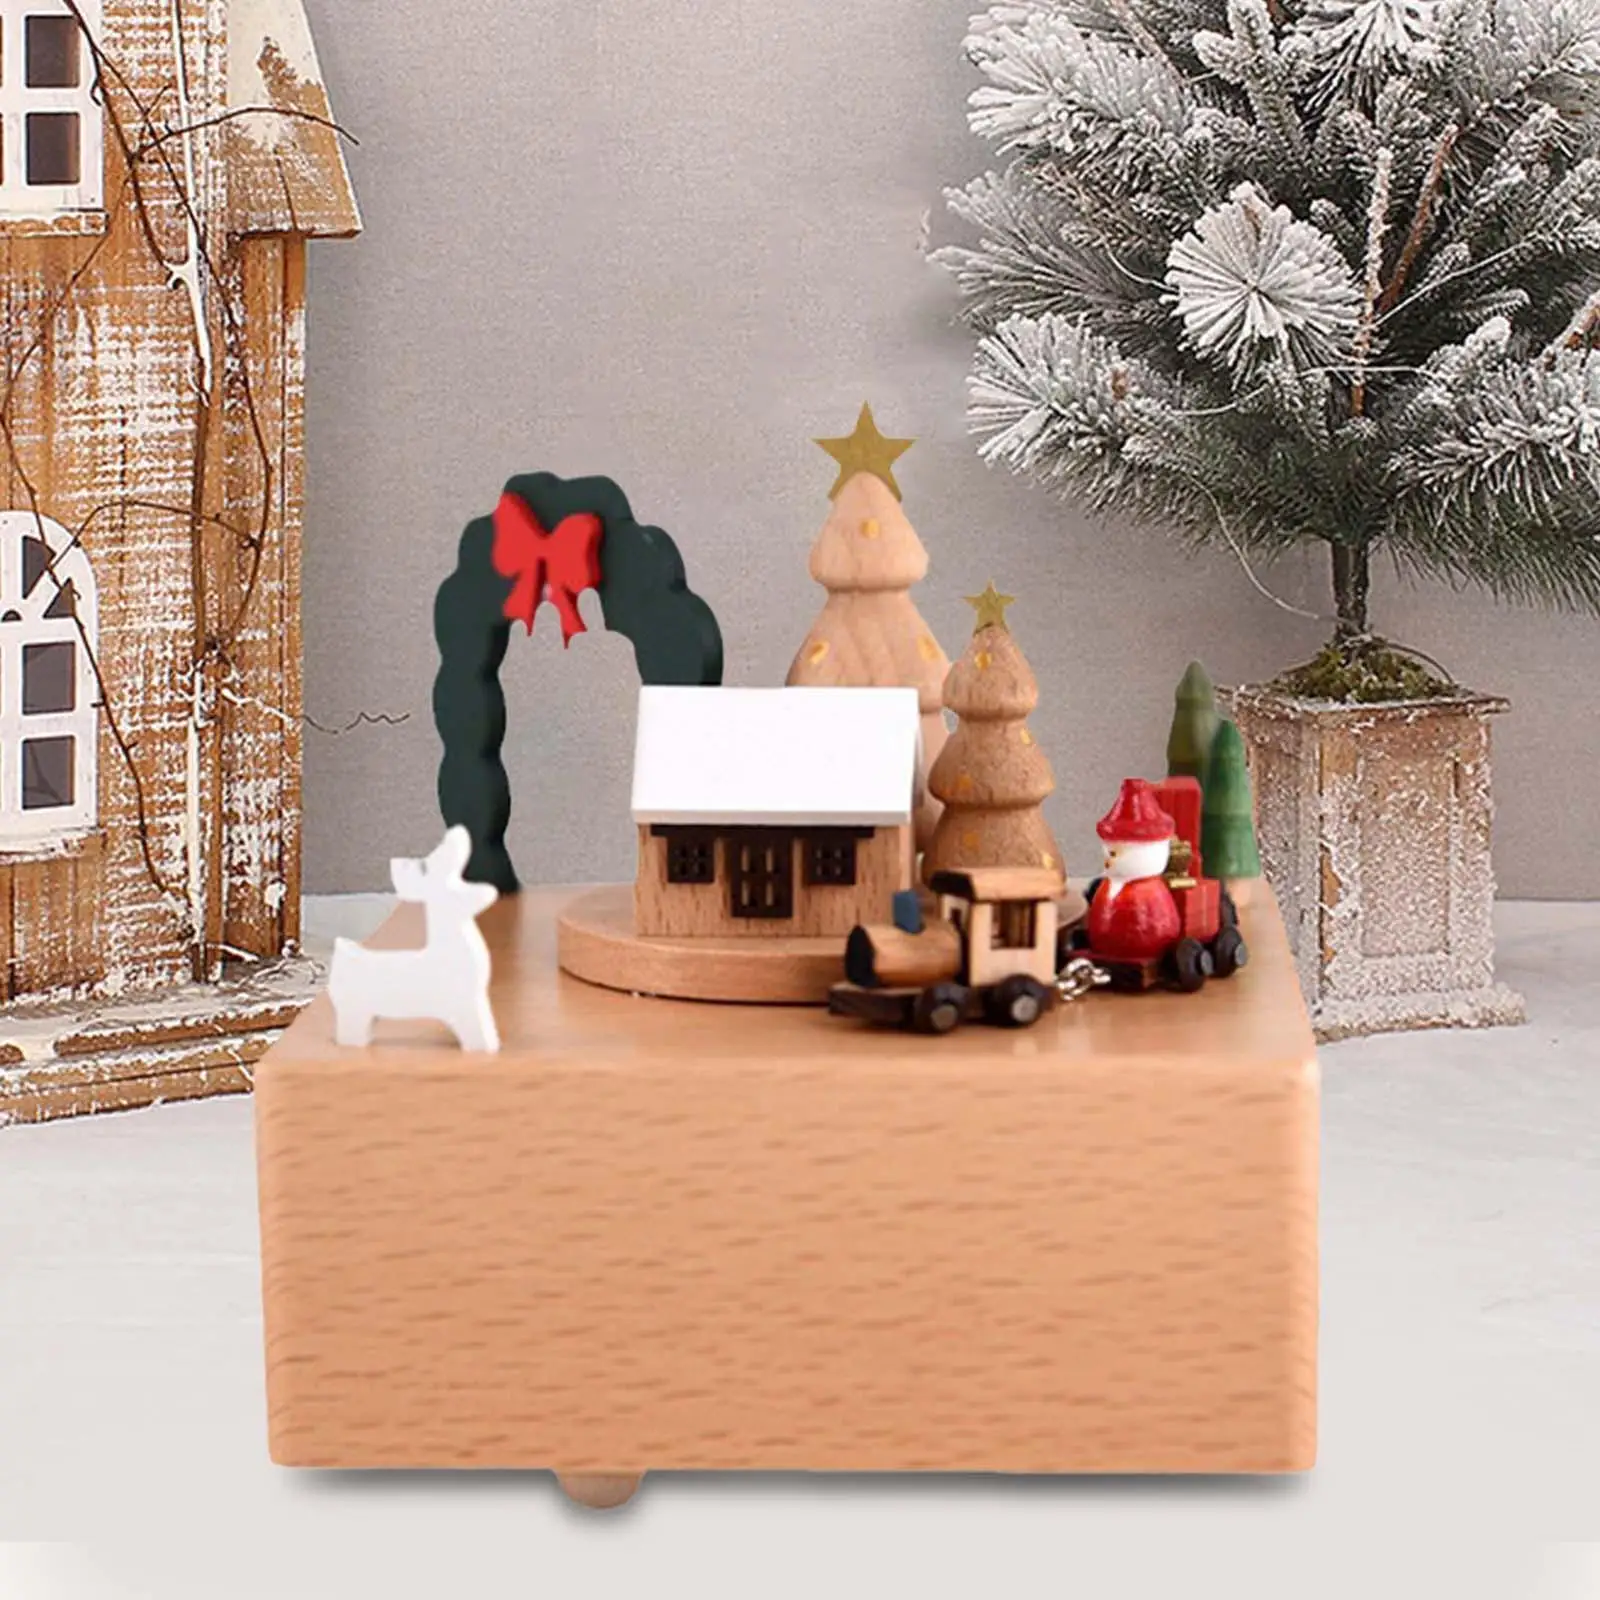 Wooden Music Box Creative Play Melody Castle Toy Christmas Themed Ornament for Collectible Holiday Birthday Ornament Home Decor